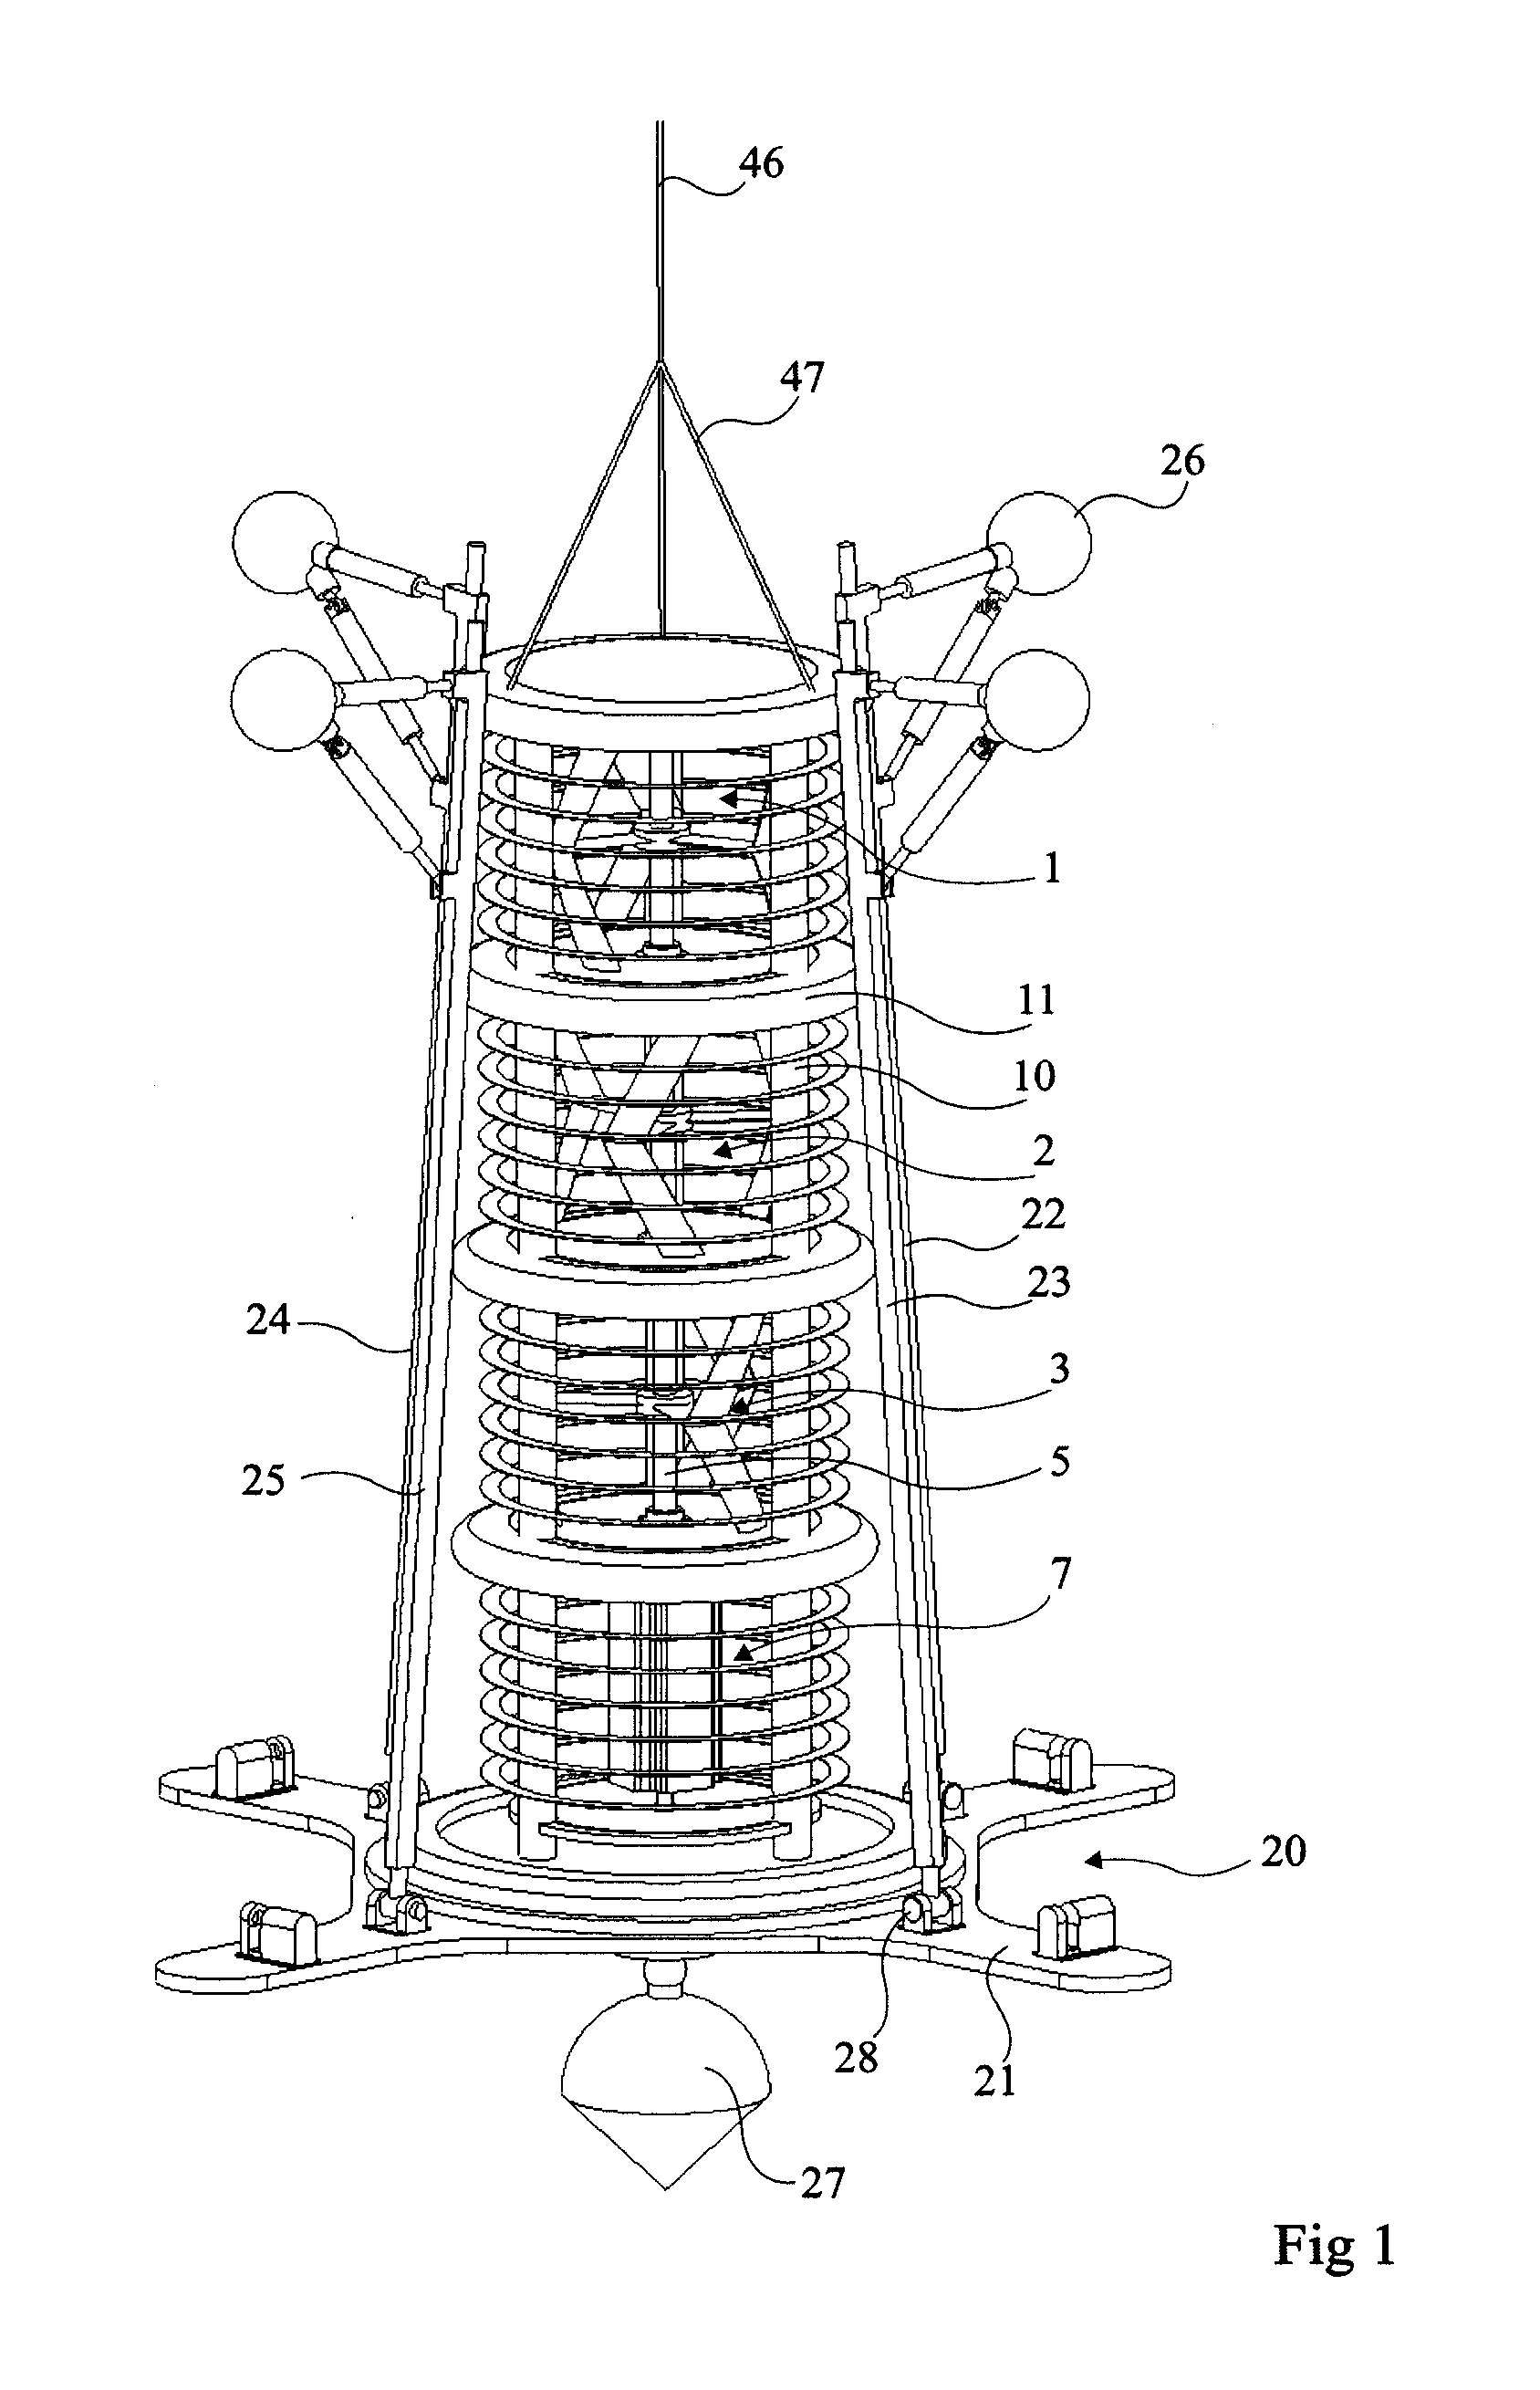 System and method for submerging a hydraulic turbine engine